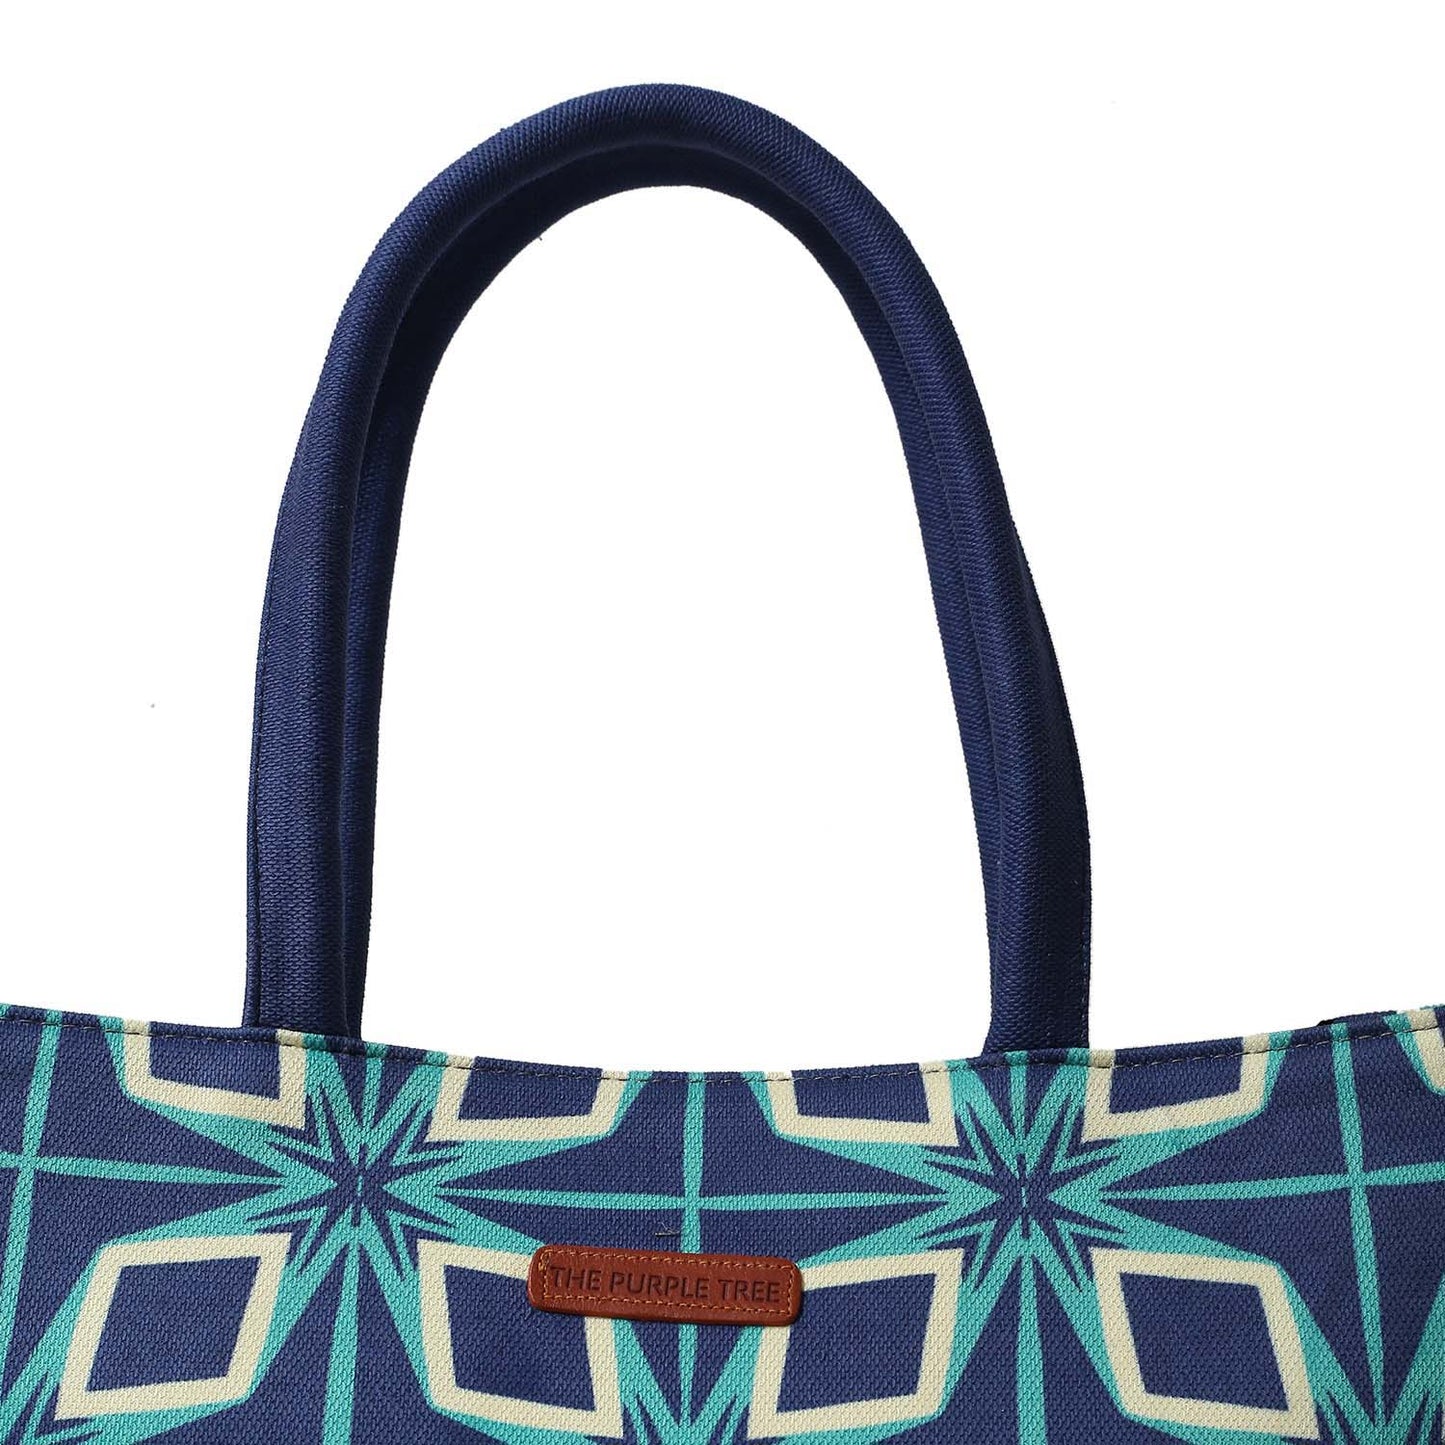 A stylish tote bag with a blue and green pattern, accompanied by a book and another book.